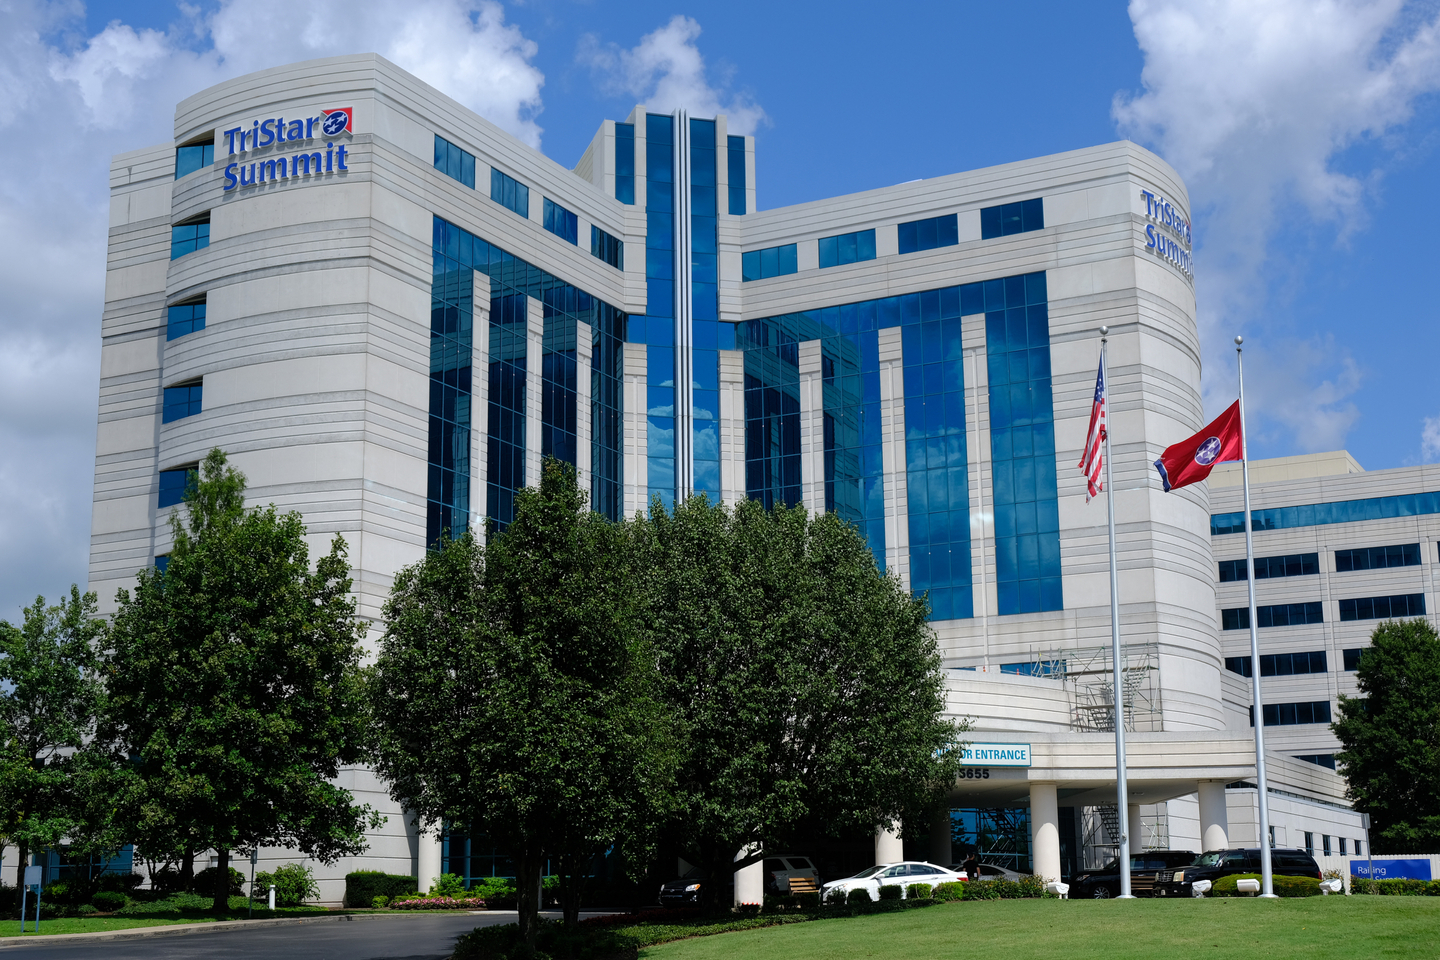 Exterior view of TriStar Summit Medical Center